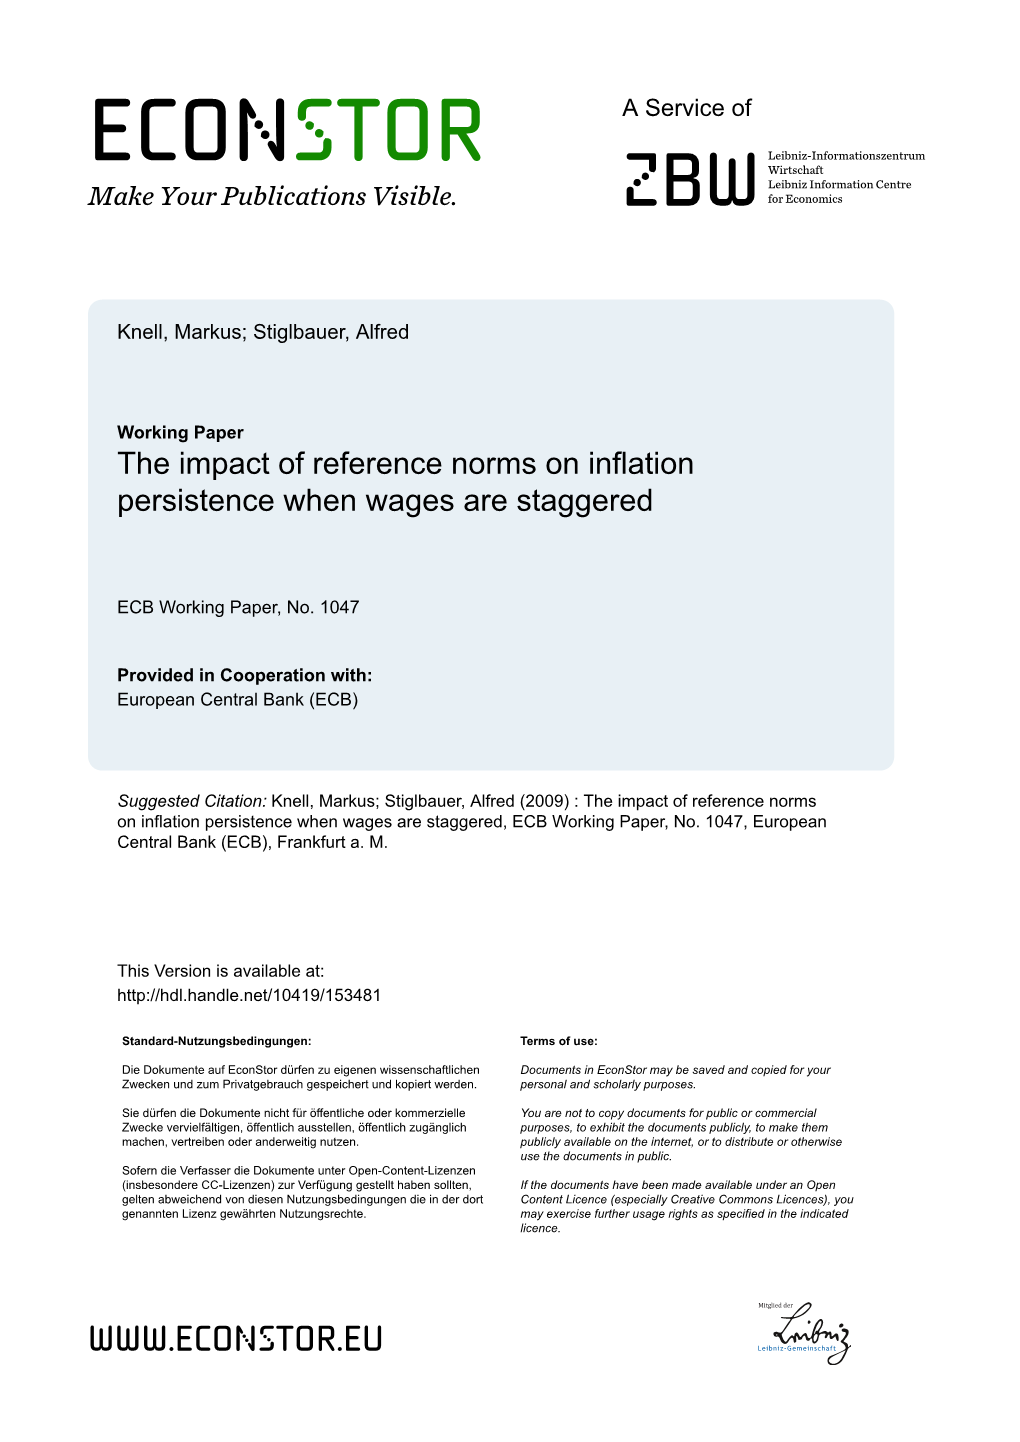 The Impact of Reference Norms on Inflation Persistence When Wages Are Staggered